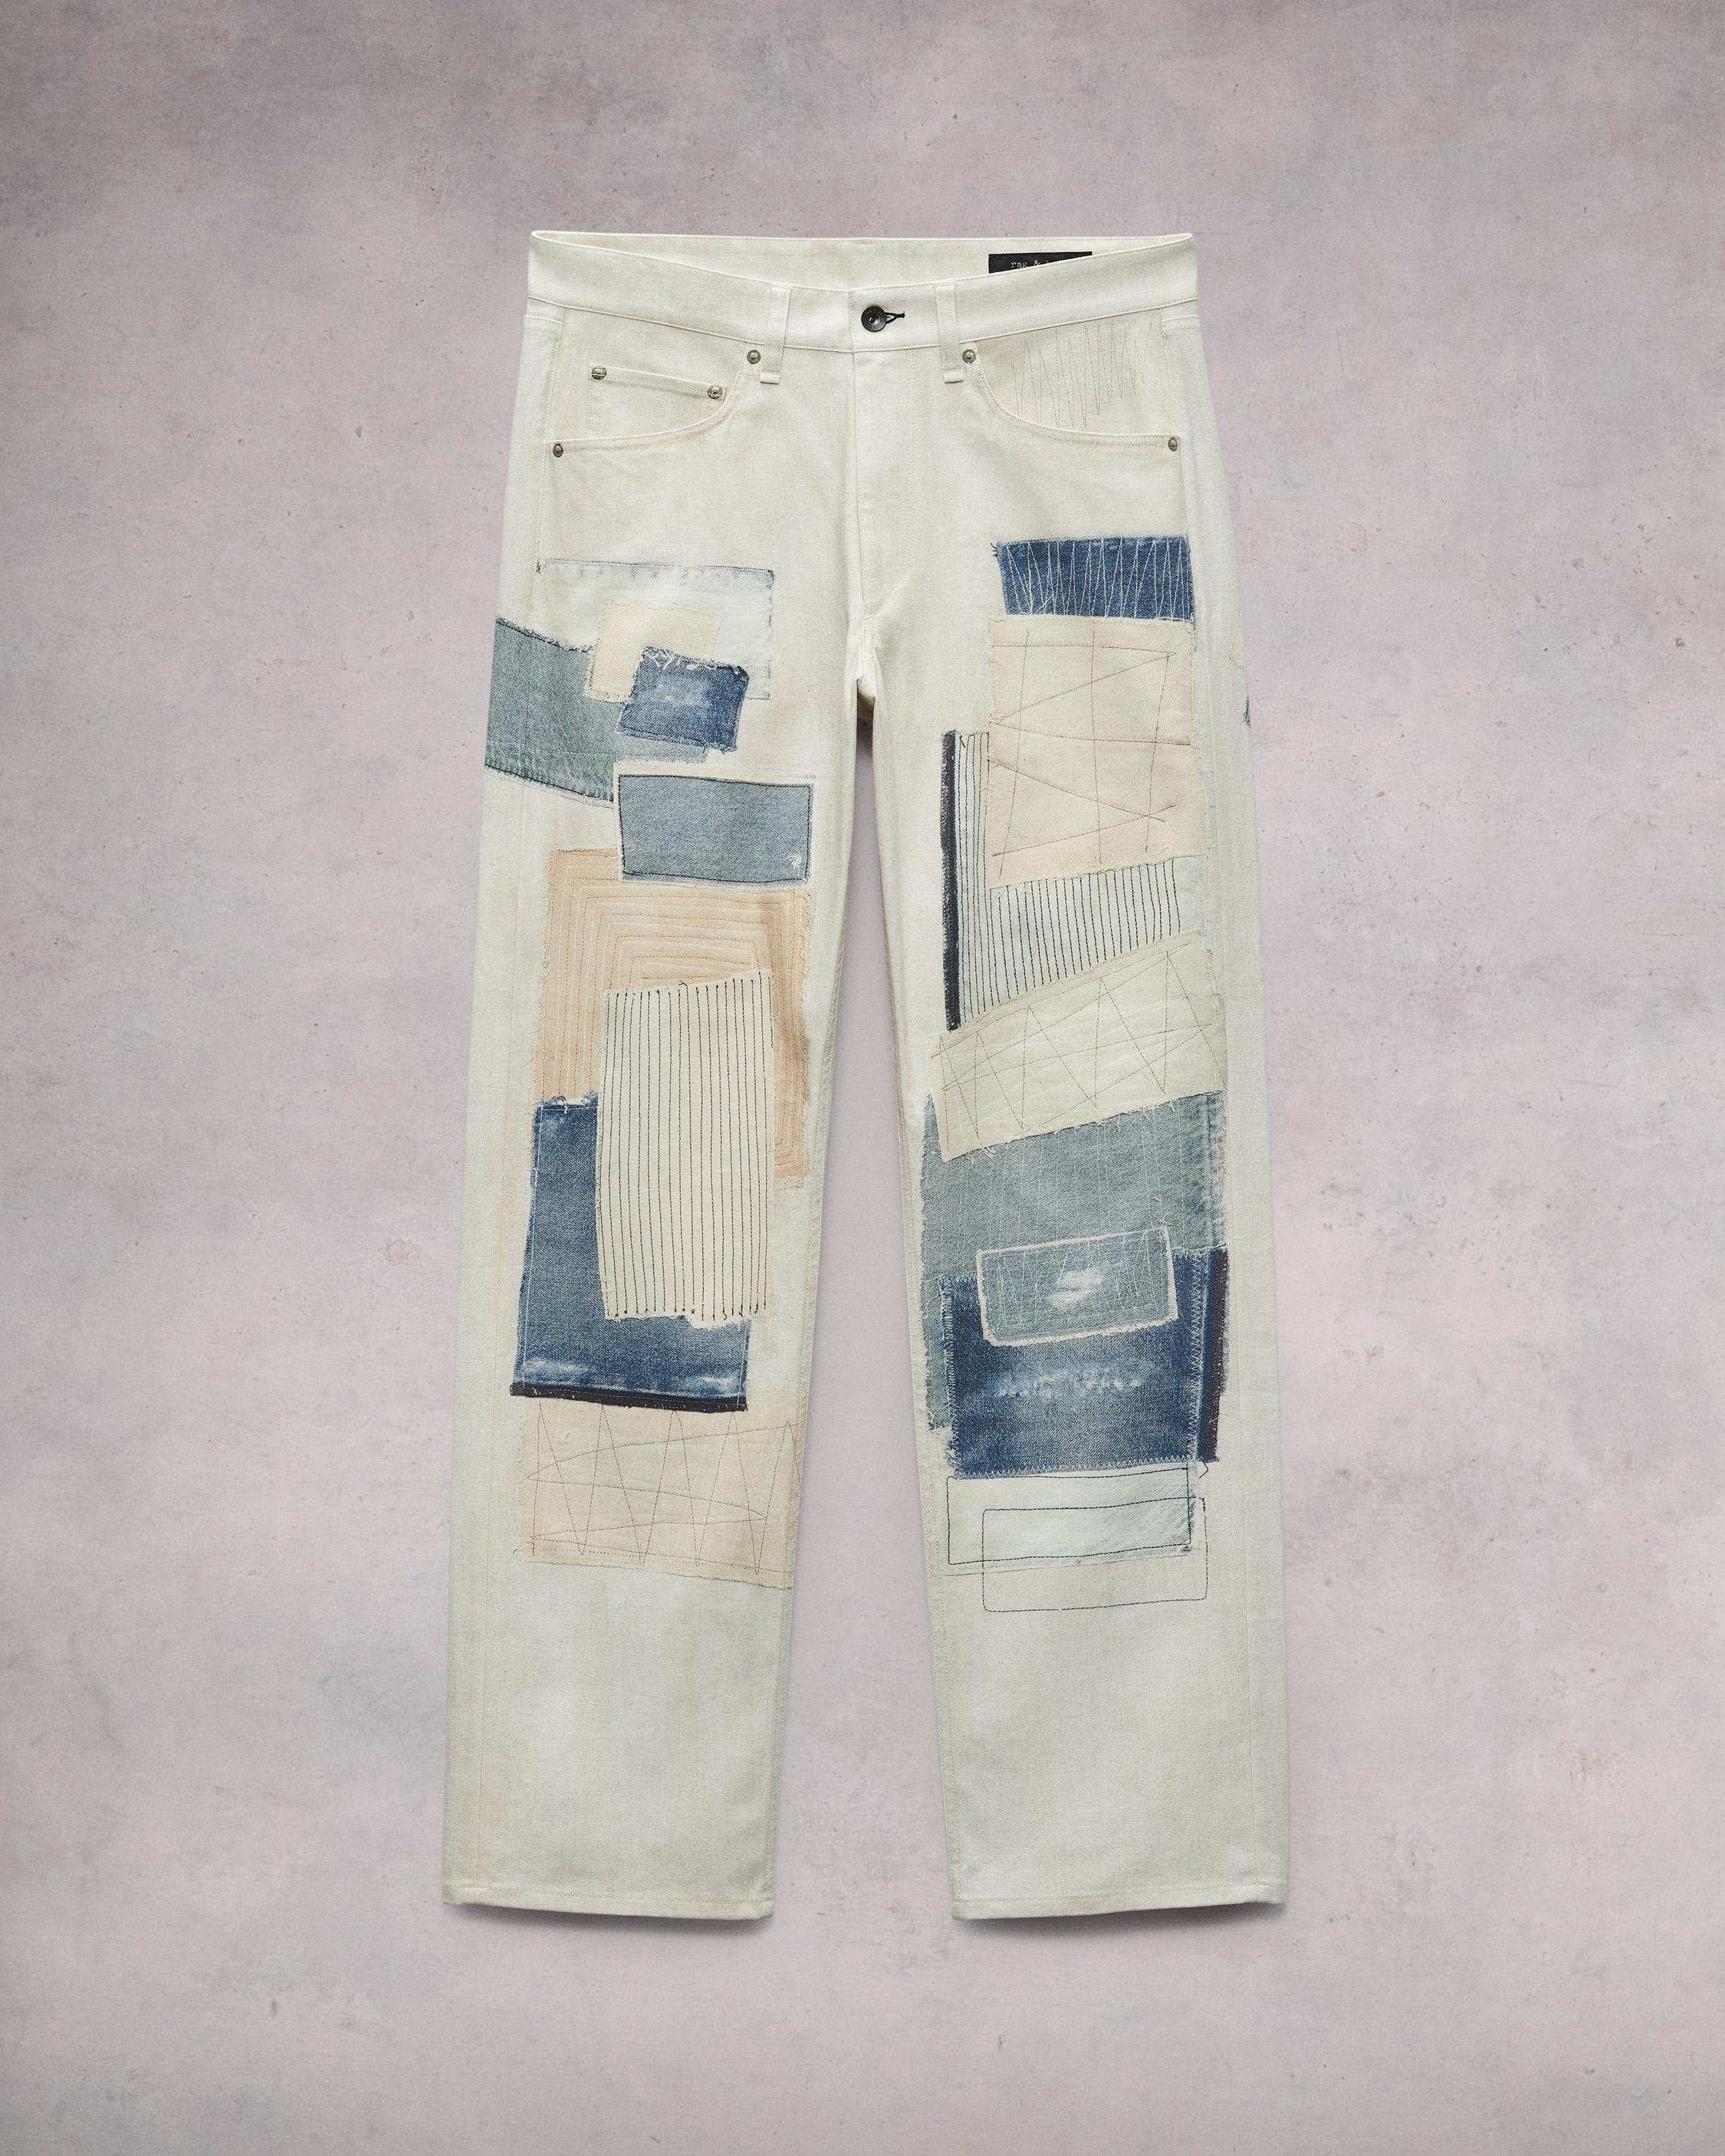 Fit 4 Miramar Canvas Pant
Relaxed Fit - 1